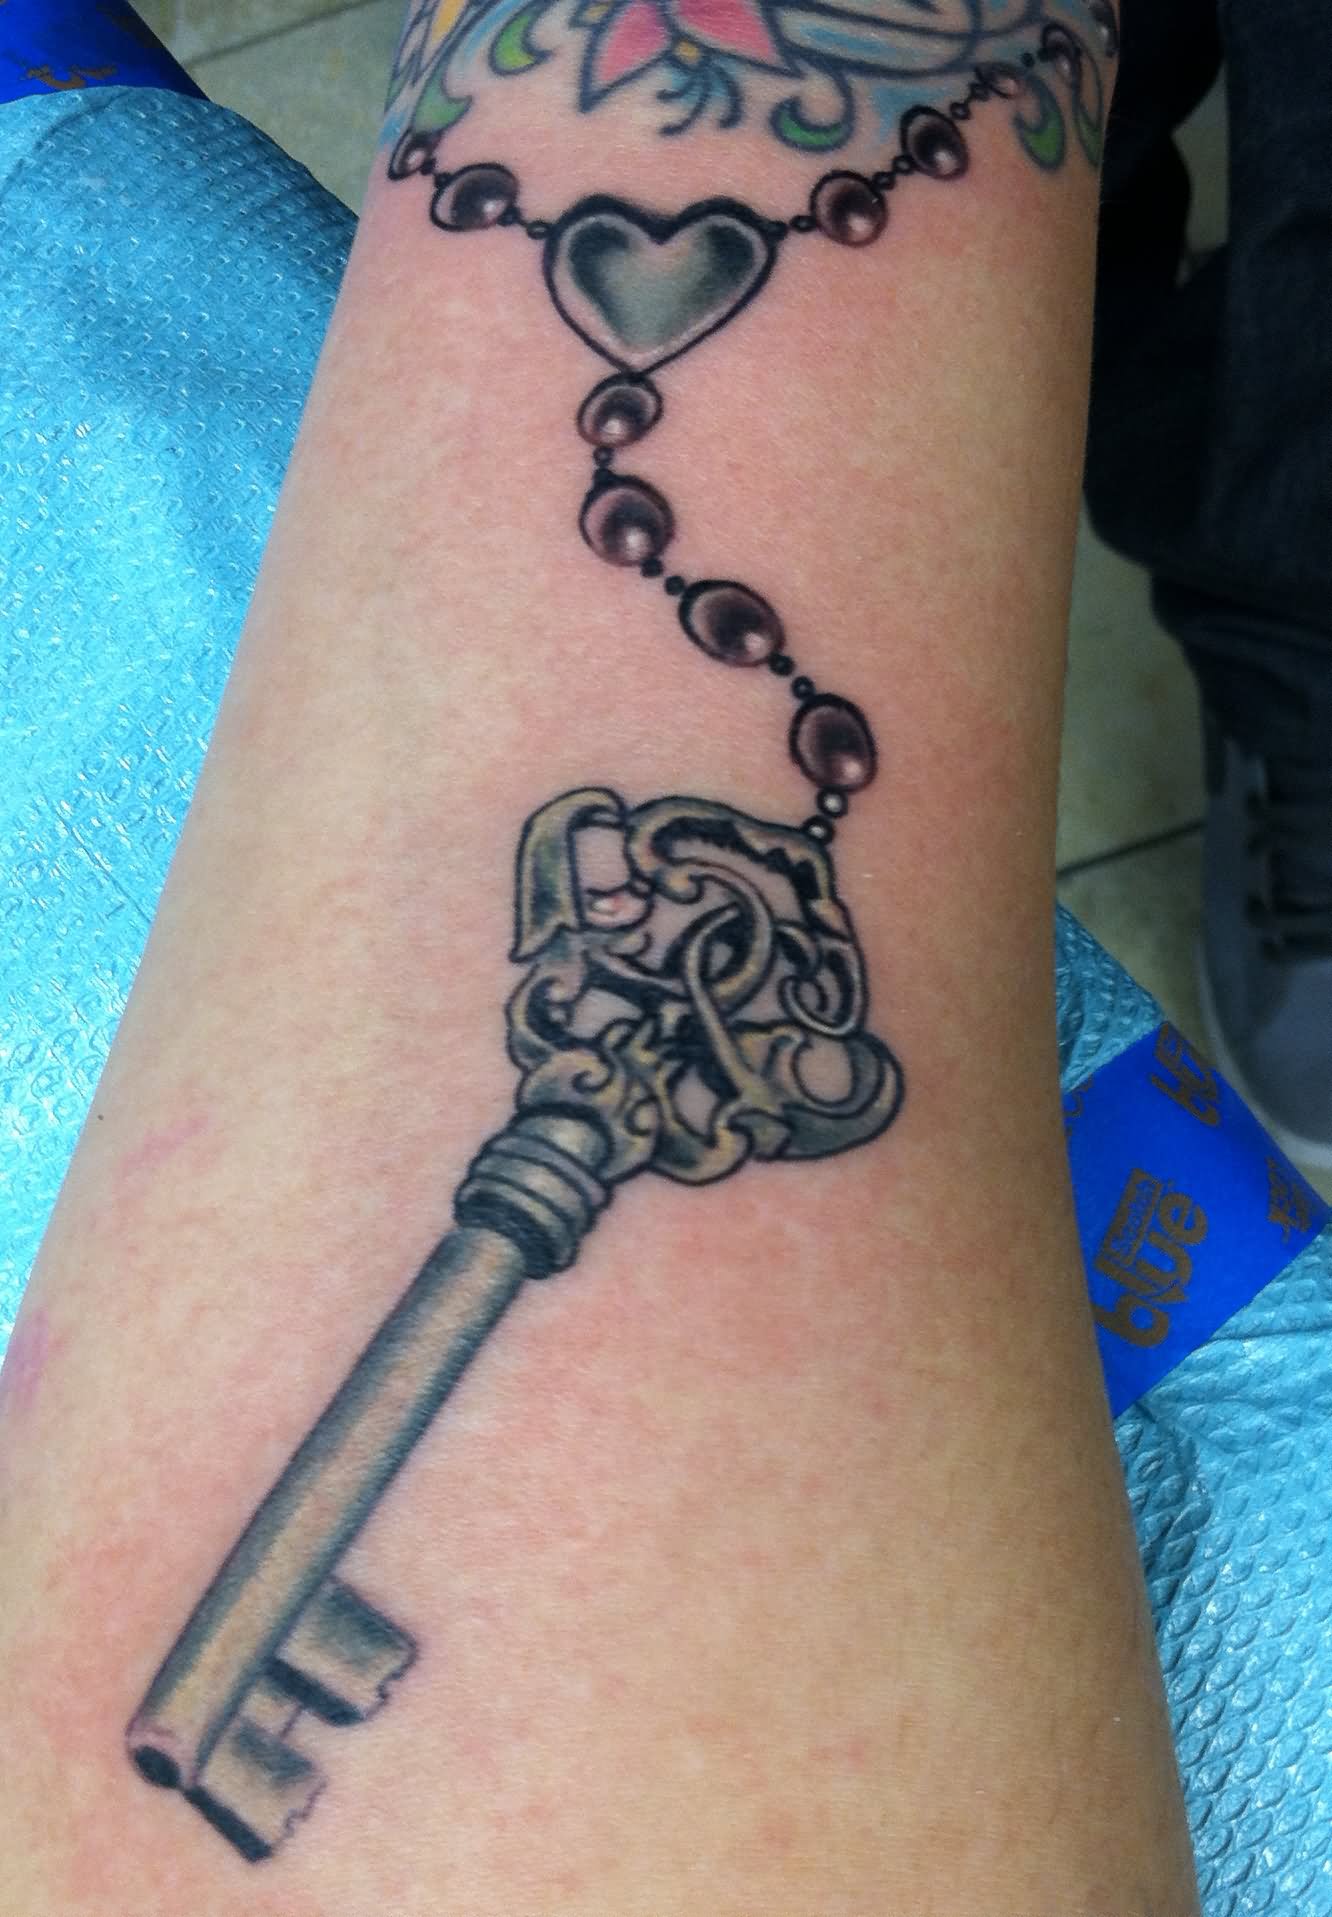 Skeleton Key With Chain Tattoo On Arm